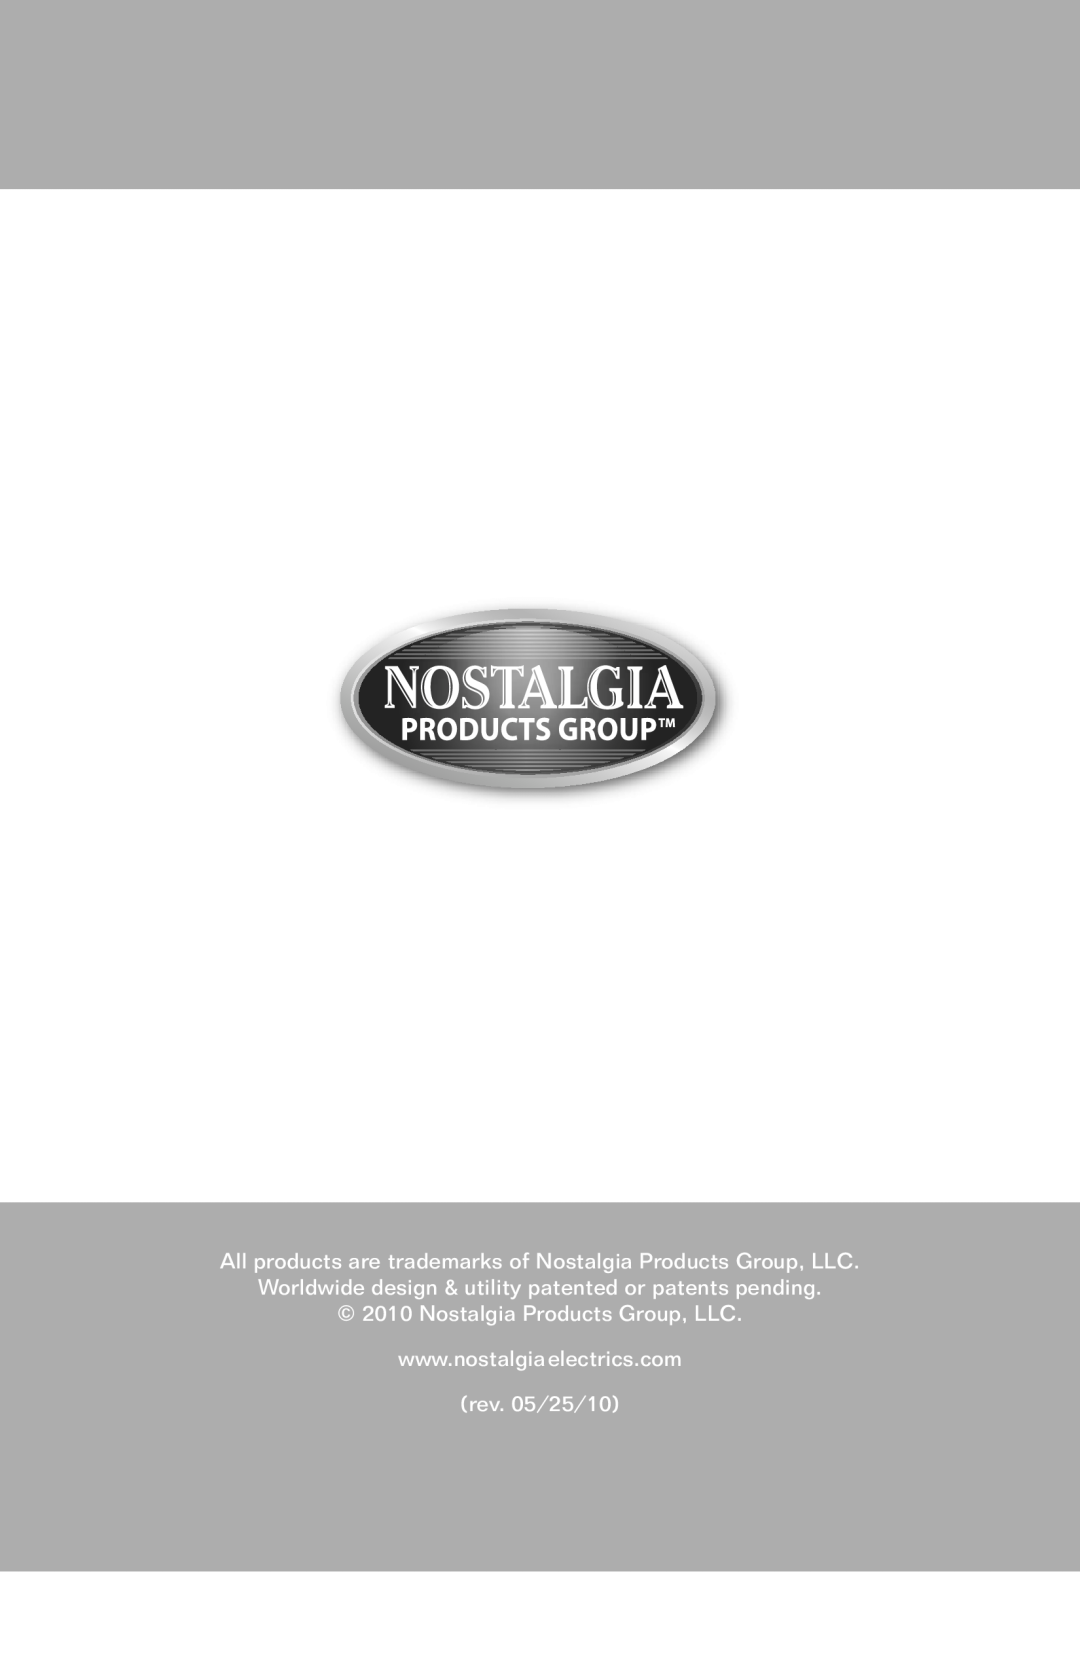 Nostalgia Electrics CCP200 manual All products are trademarks of Nostalgia Products Group, LLC, rev. 05/25/10 